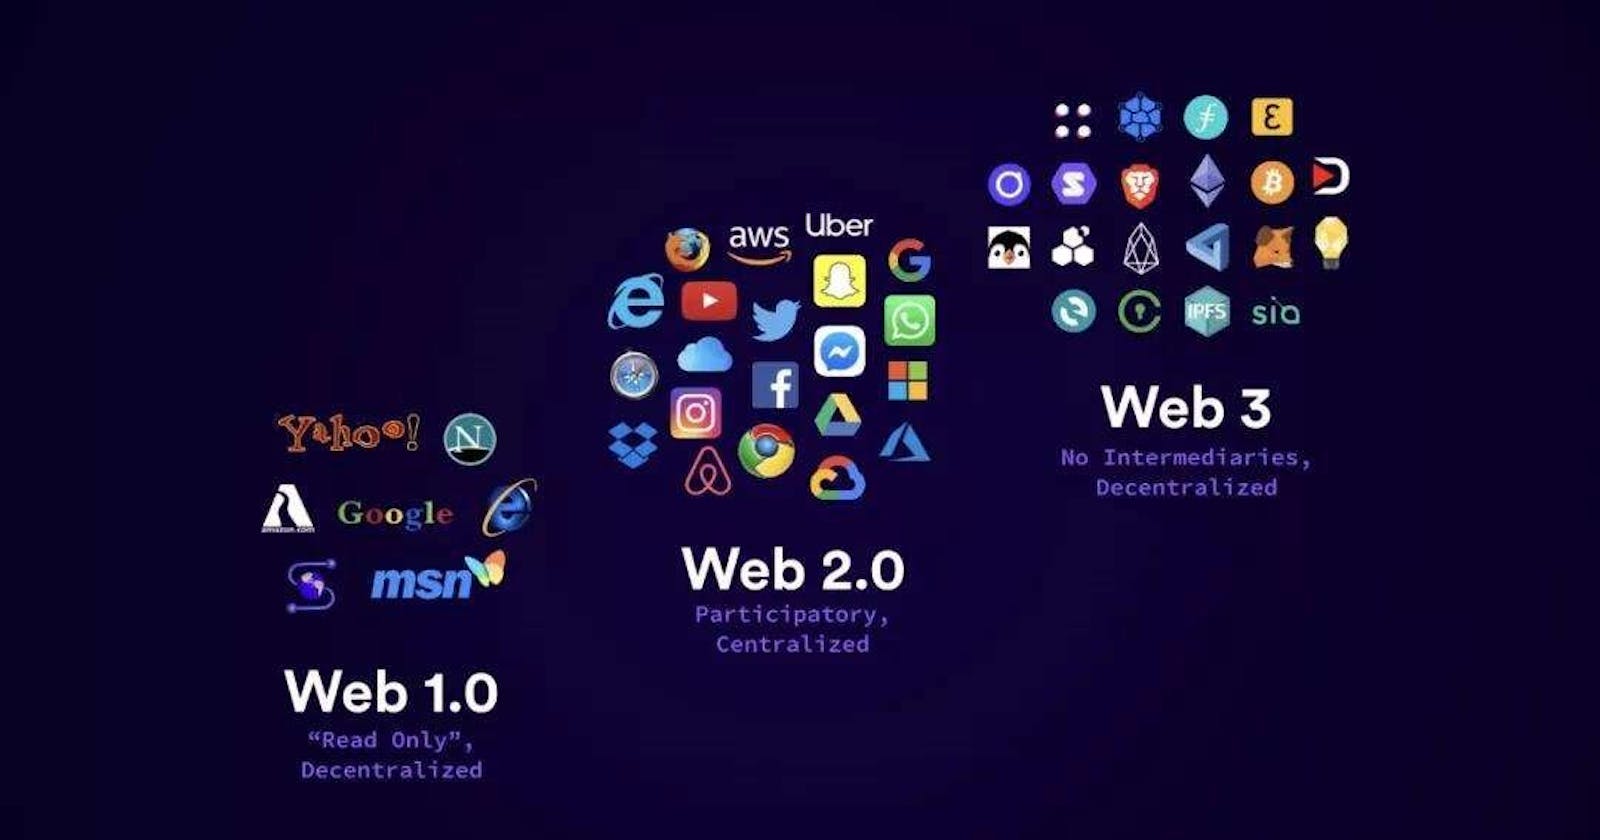 Who owns Web 3.0?